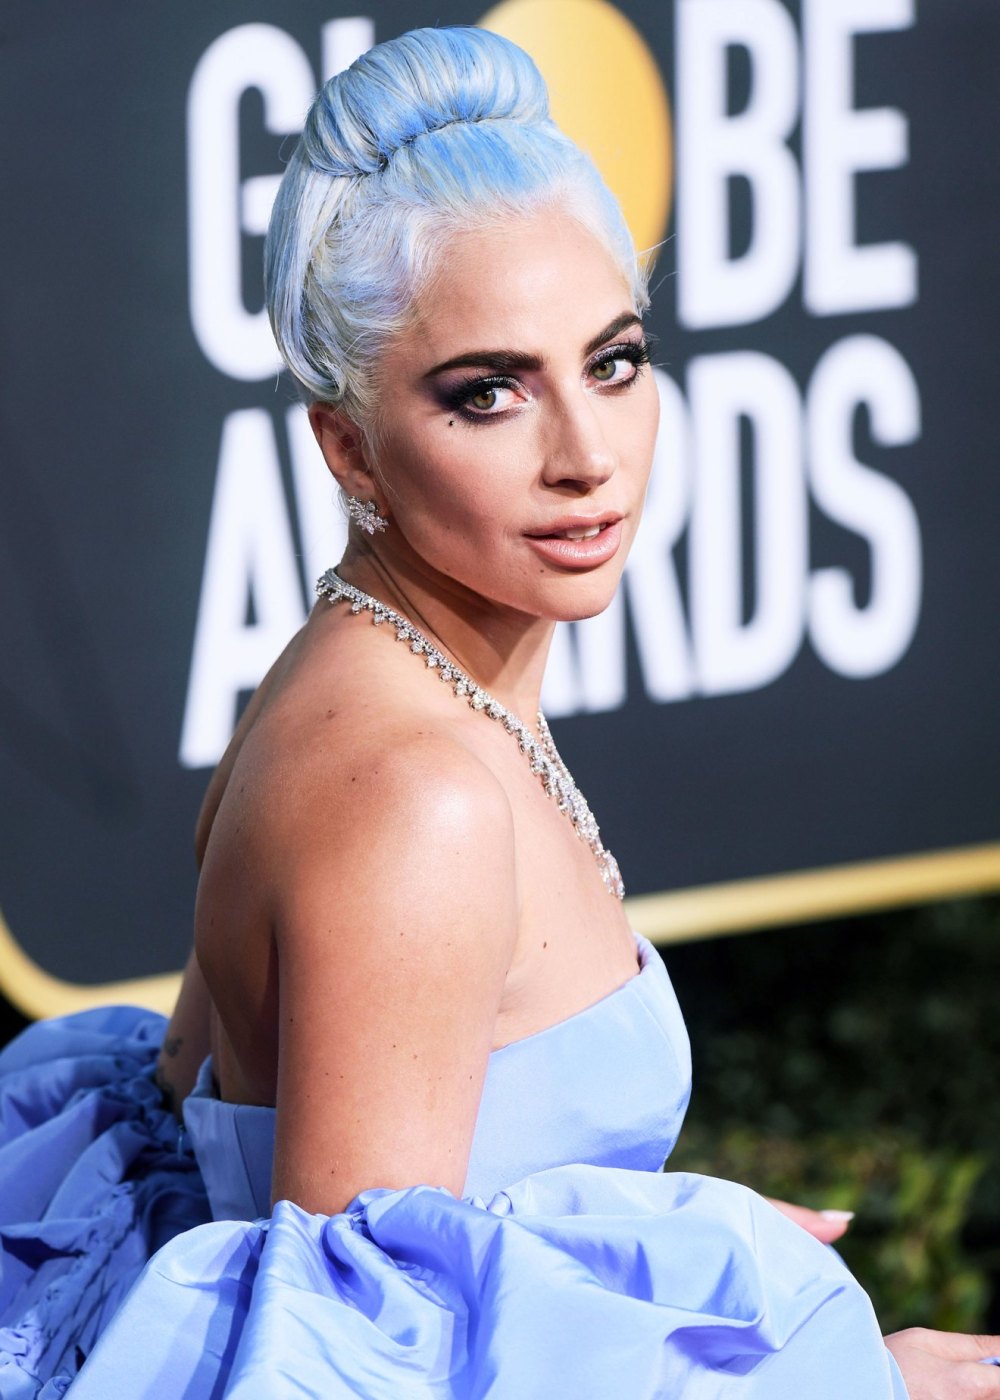 Lady Gaga Is the Face of This Super Luxe Fragrance Campaign